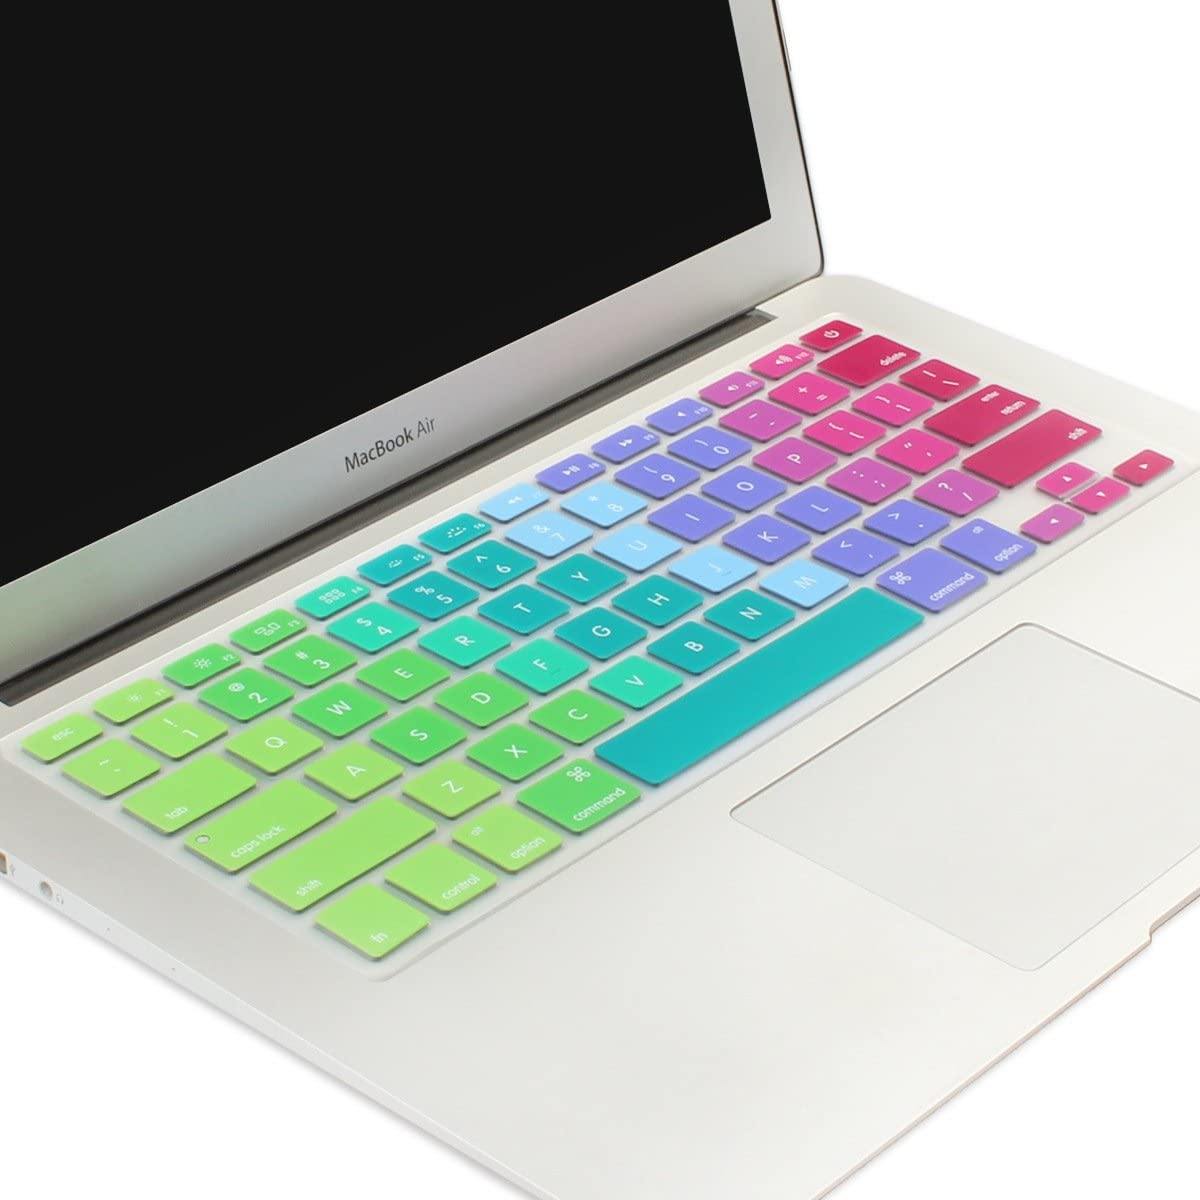 Silicone Keyboard Skin Cover for MacBook Pro 13/15 Inch (with/Without Retina Display, 2015 or Older Version),Older MacBook Air 13 Inch (Rainbow) - iFyx